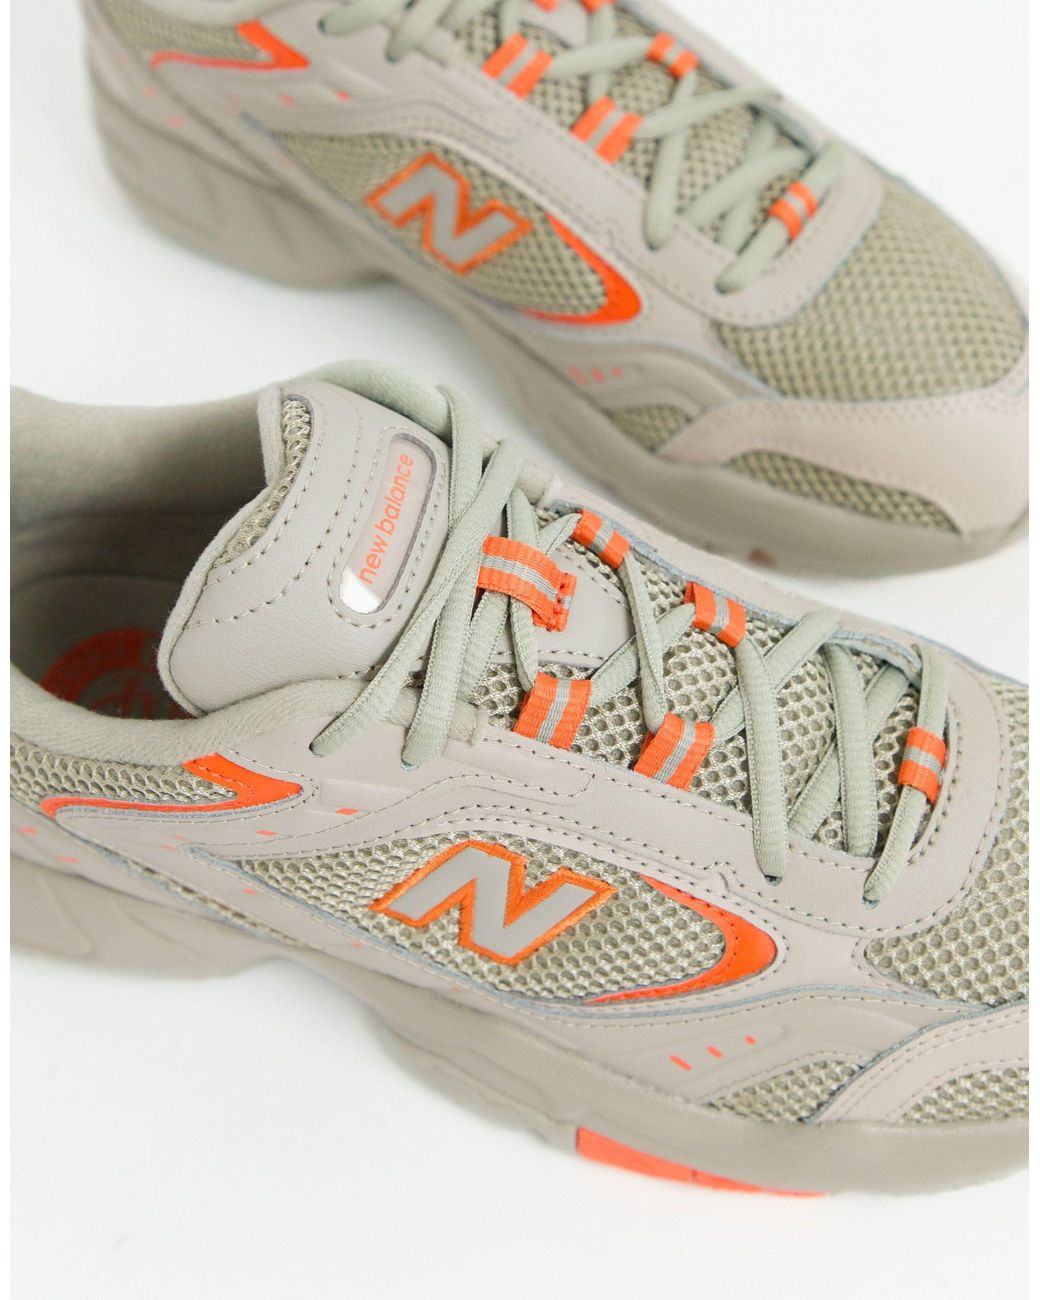 New Balance Utility Pack 452 Trainers In Grey Exclusive At ASOS |  islamiyyat.com